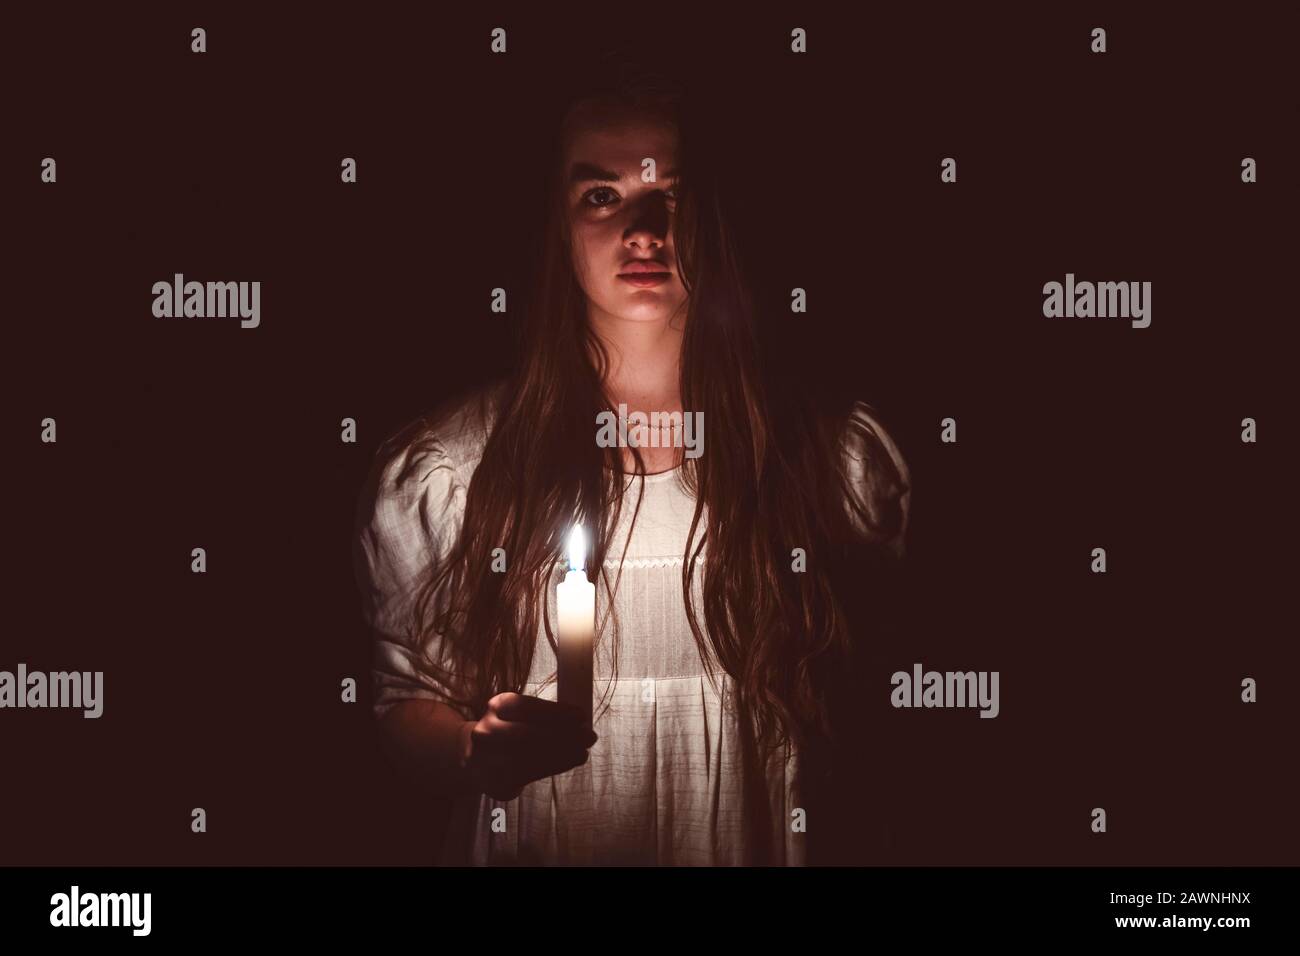 A young scary girl in an old white dress holding a candle in her hand and staring in to the camera. Dark background. Scary horror concept. Stock Photo